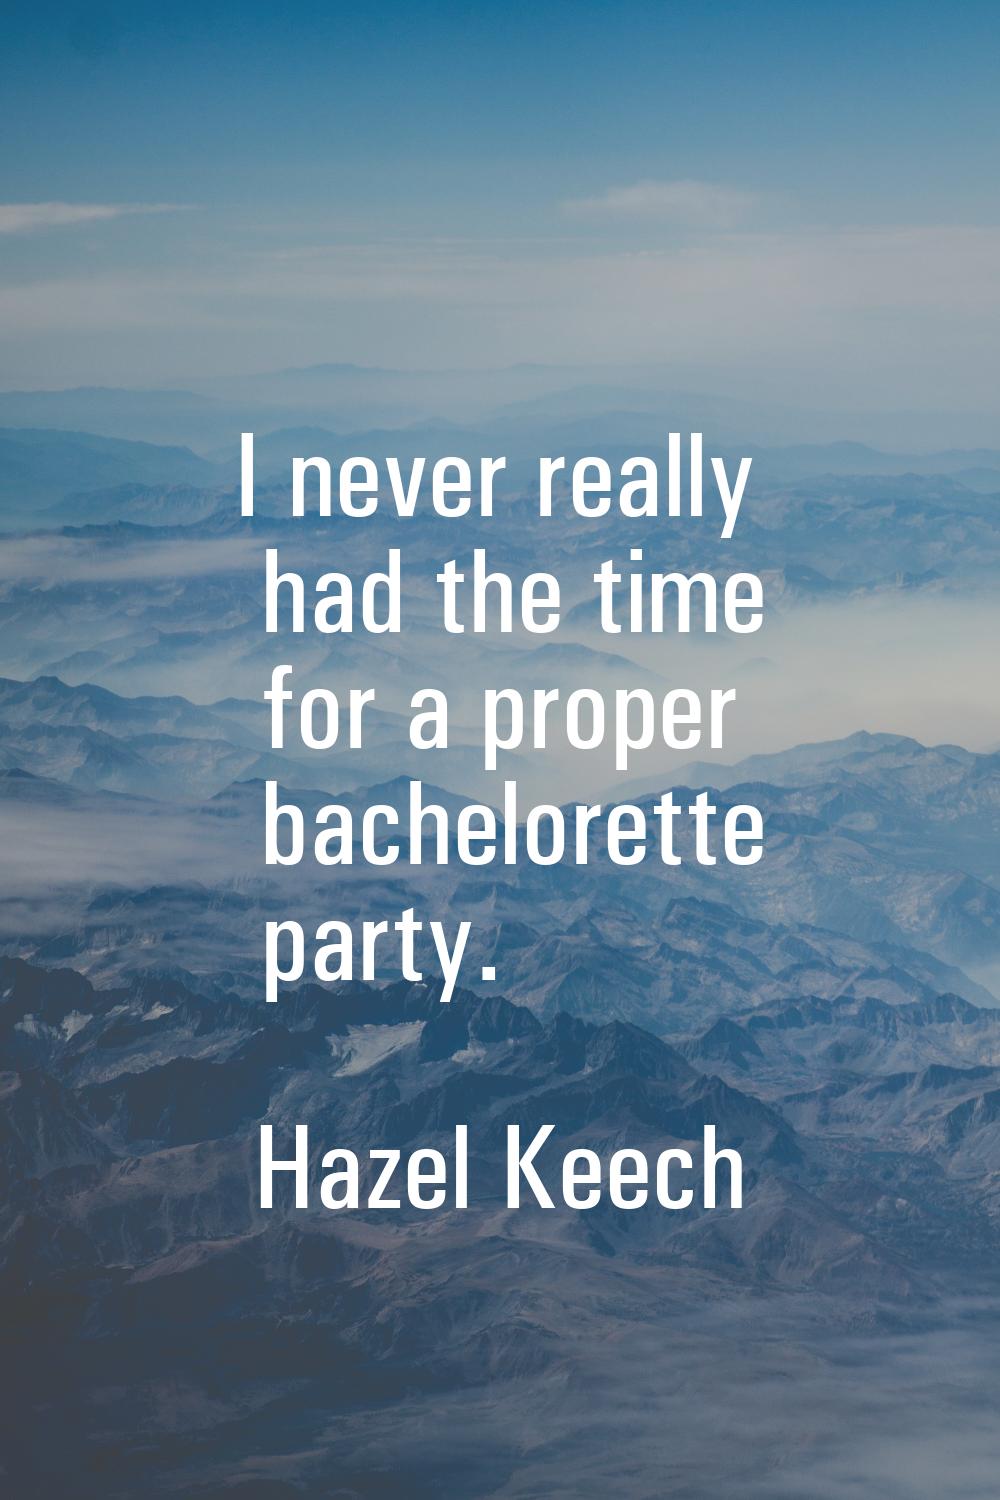 I never really had the time for a proper bachelorette party.